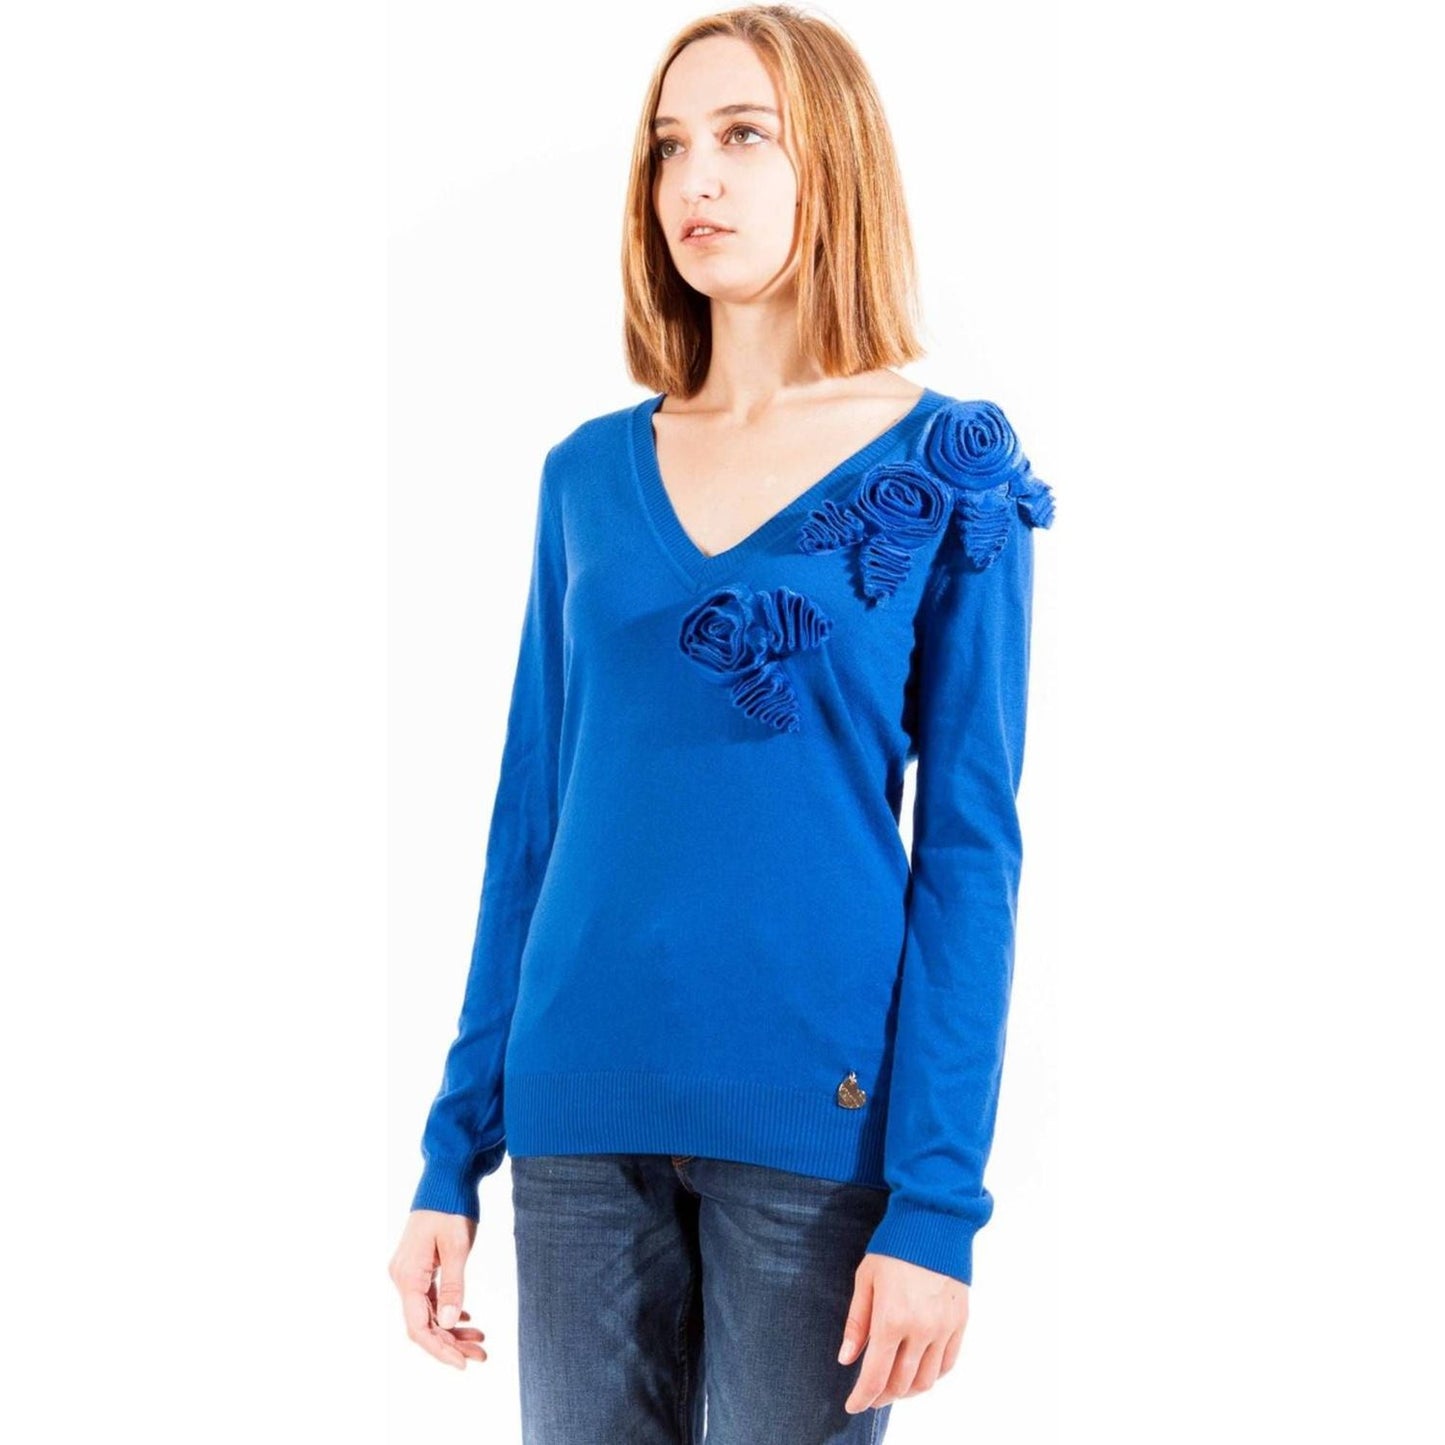 Love Moschino Embroidered V-Neck Long Sleeve Sweater embroidered-v-neck-long-sleeve-sweater